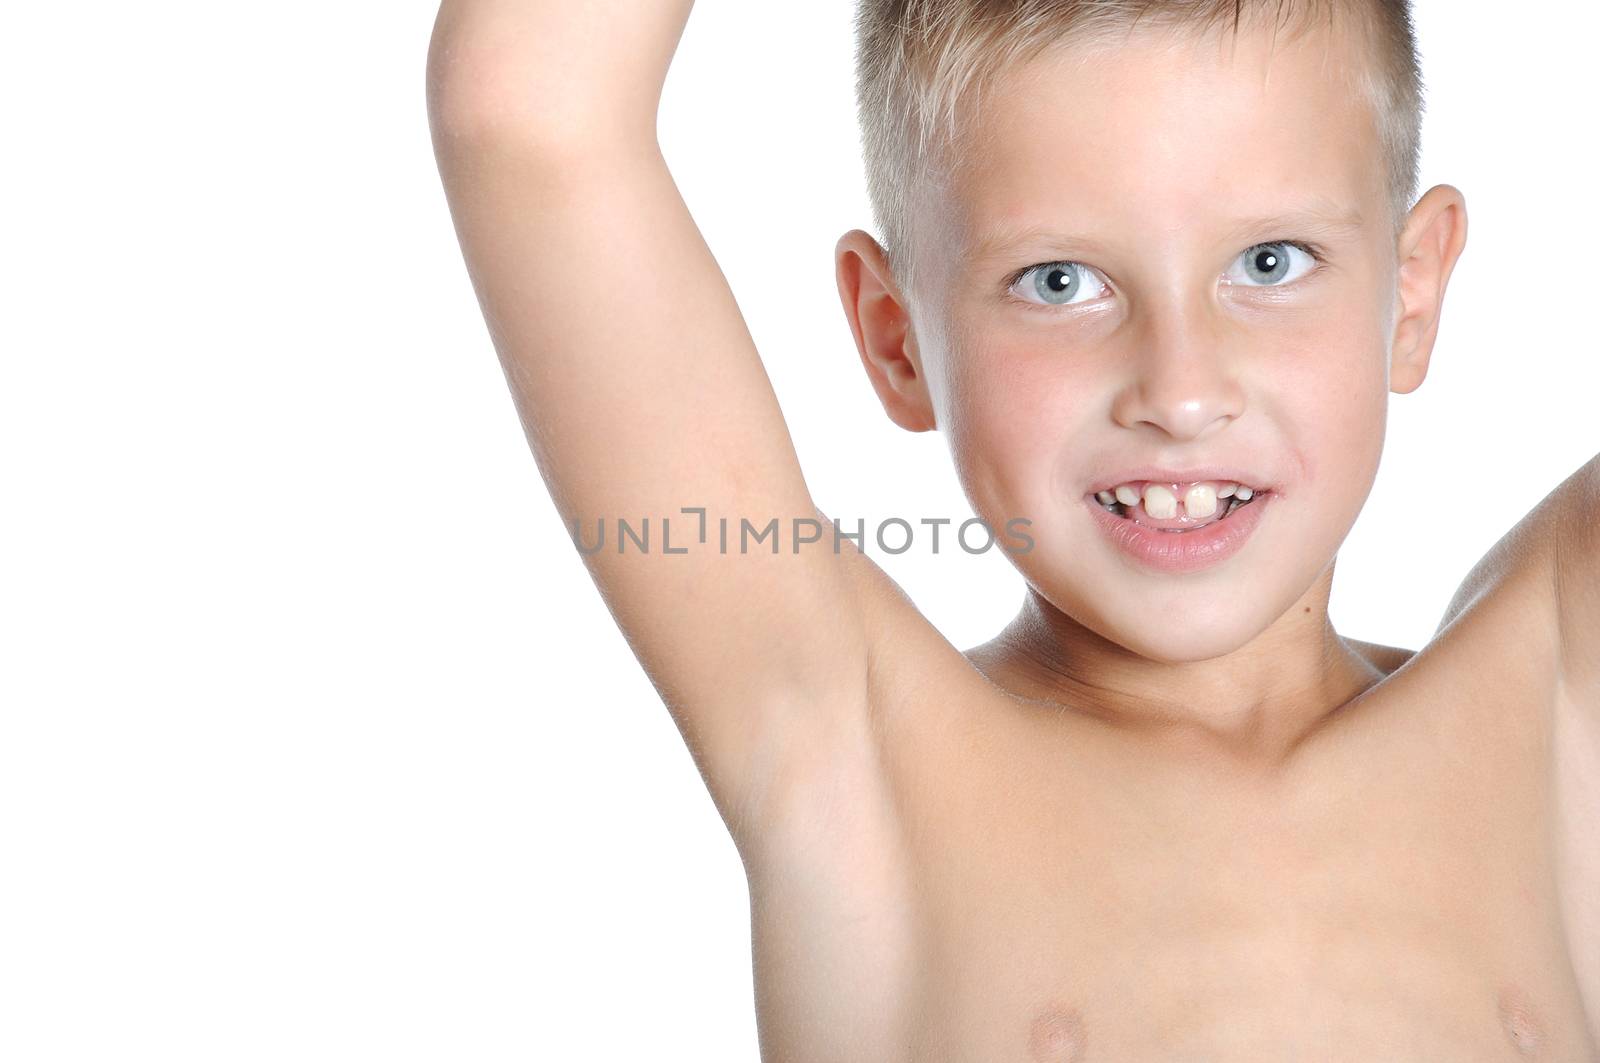 photo of young muscular posing naked torso holding raised hands and arms up isolated over white background